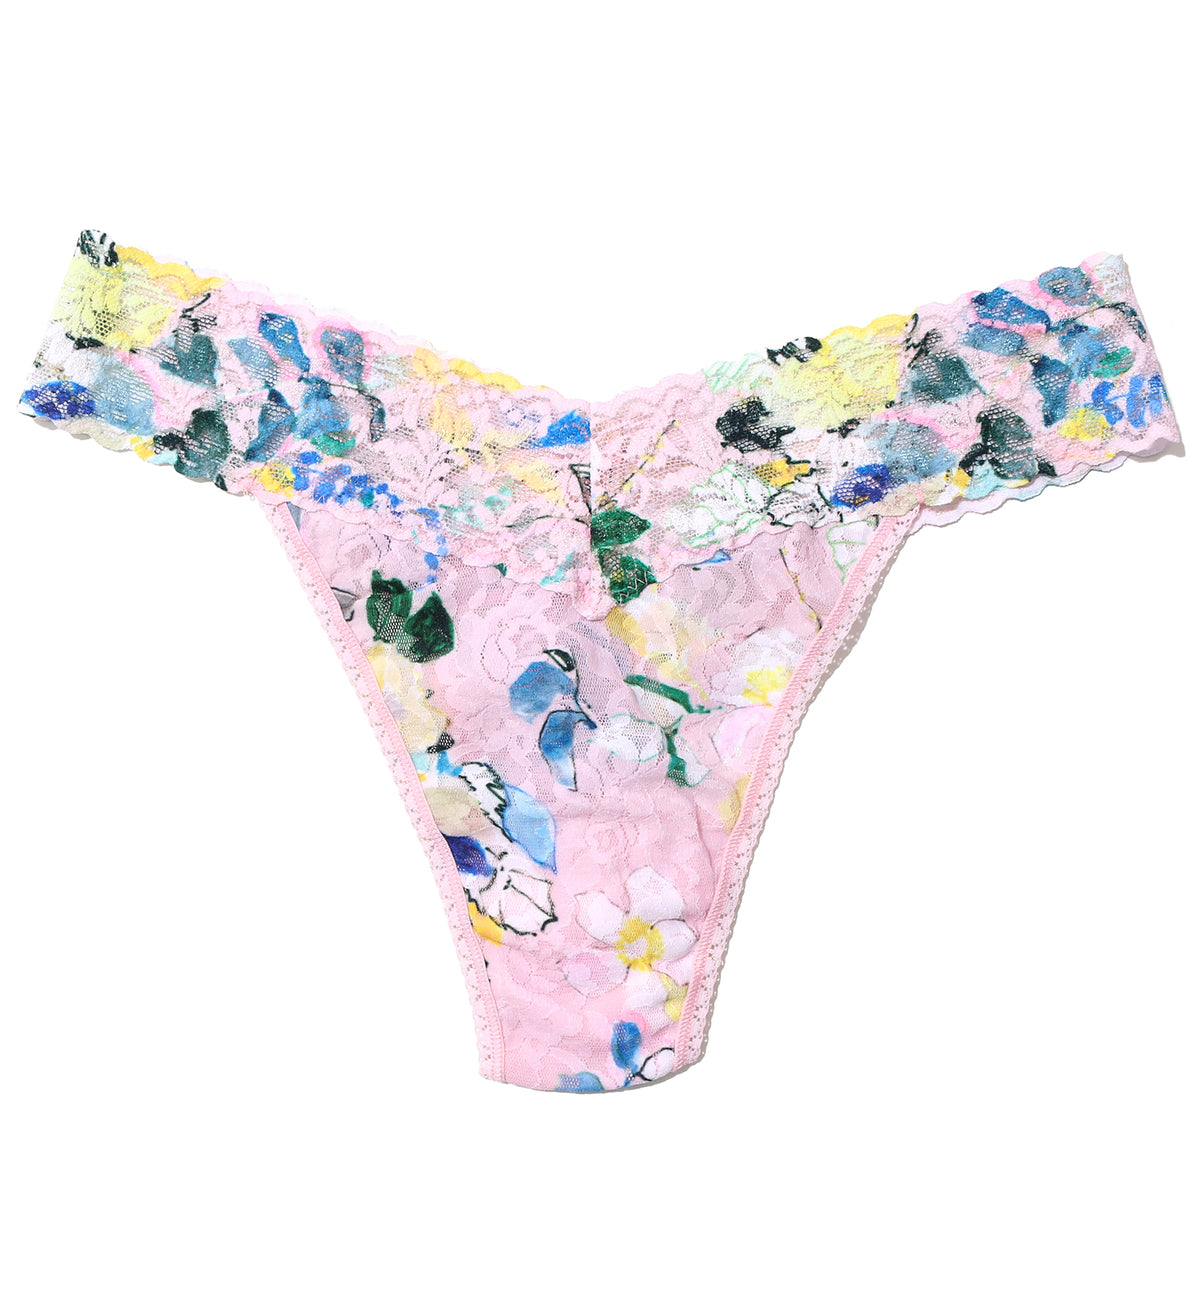 Hanky Panky Signature Lace Printed Original Rise Thong (PR4811P),Cannes You Believe It - Cannes You Believe It,One Size